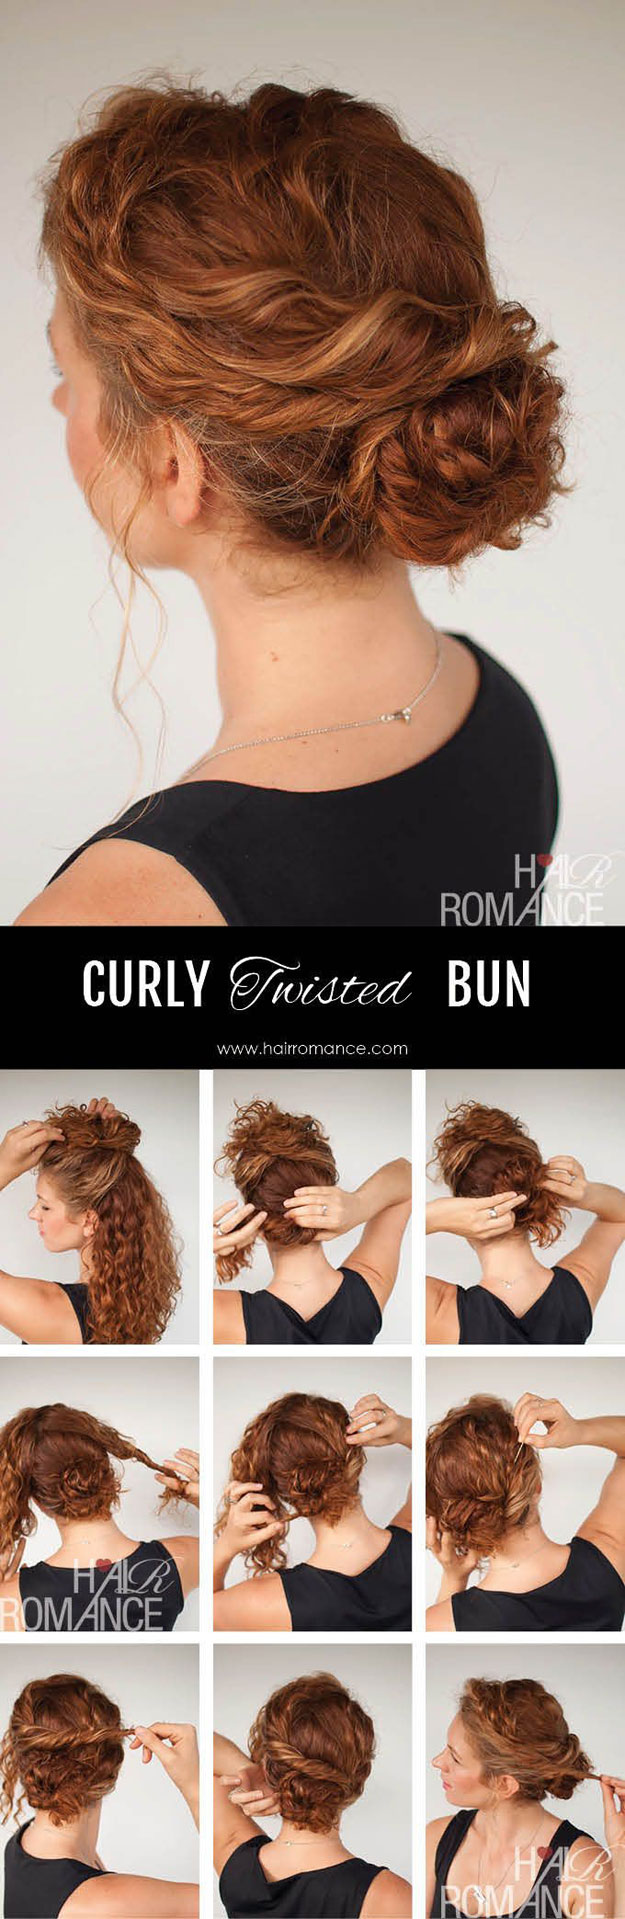 Quick Hairstyles to Do At Home - Step by Step Tutorials for Hair Braiding, Ponytails, Up and Down Straight Styles - Curly Twisted Bun Pulled Back - Easy Hair Ideas for Teens